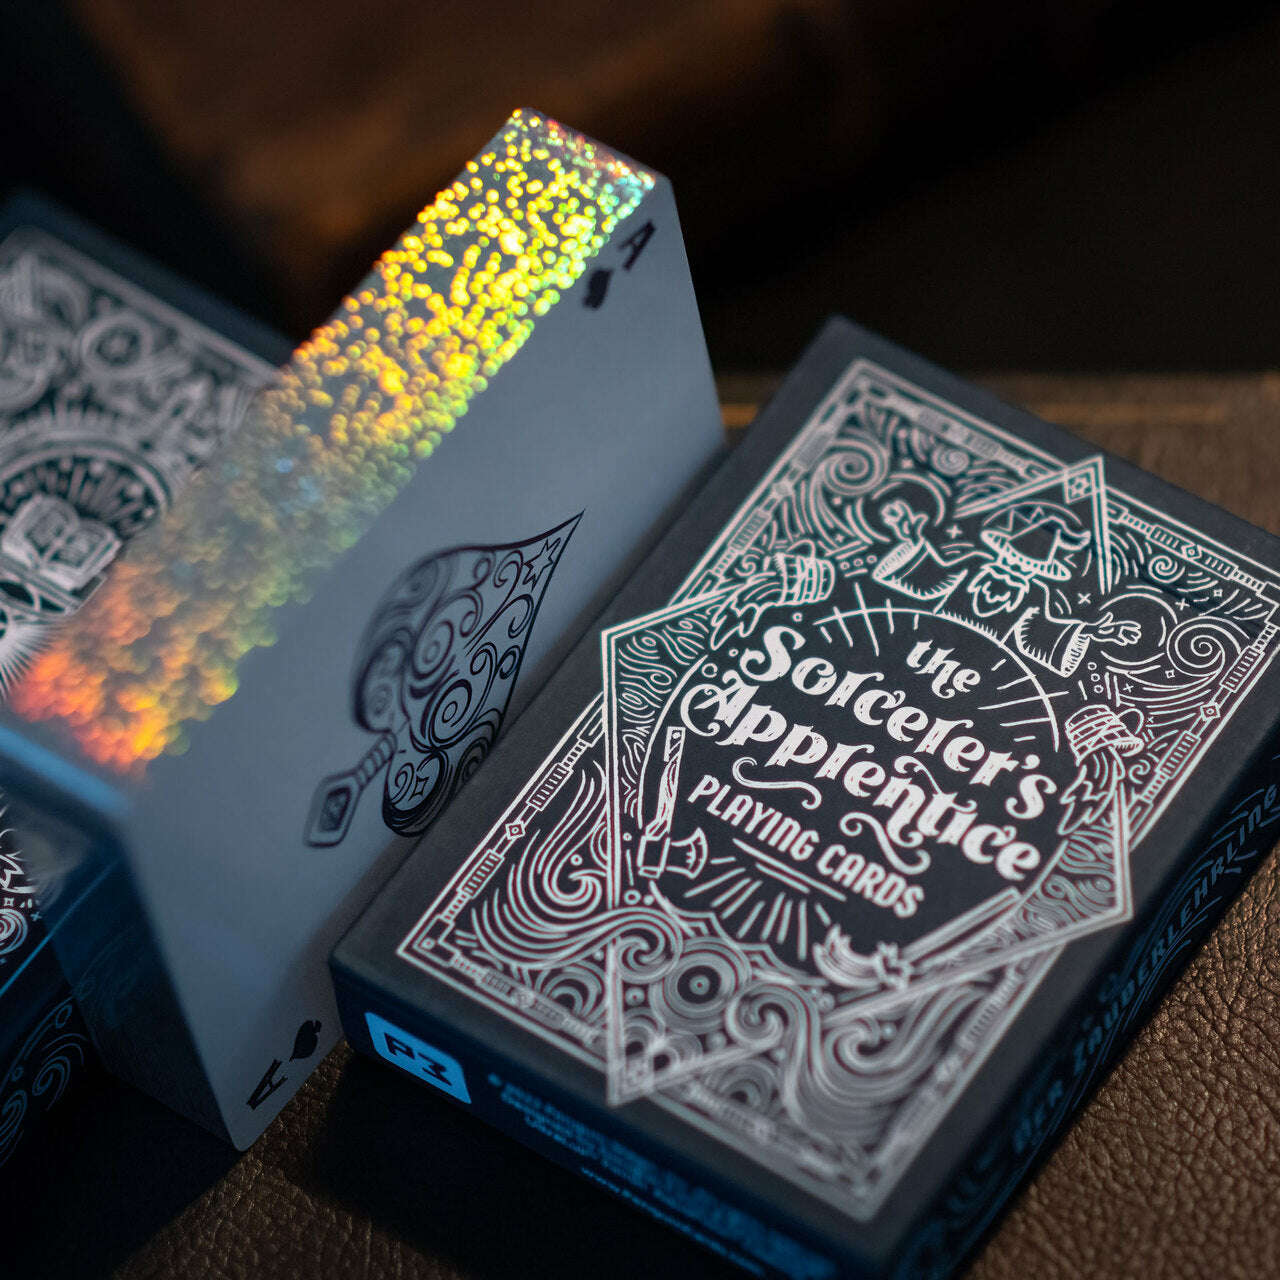 PlayingCardDecks.com-Sorcerer's Apprentice Gilded Marked Playing Cards